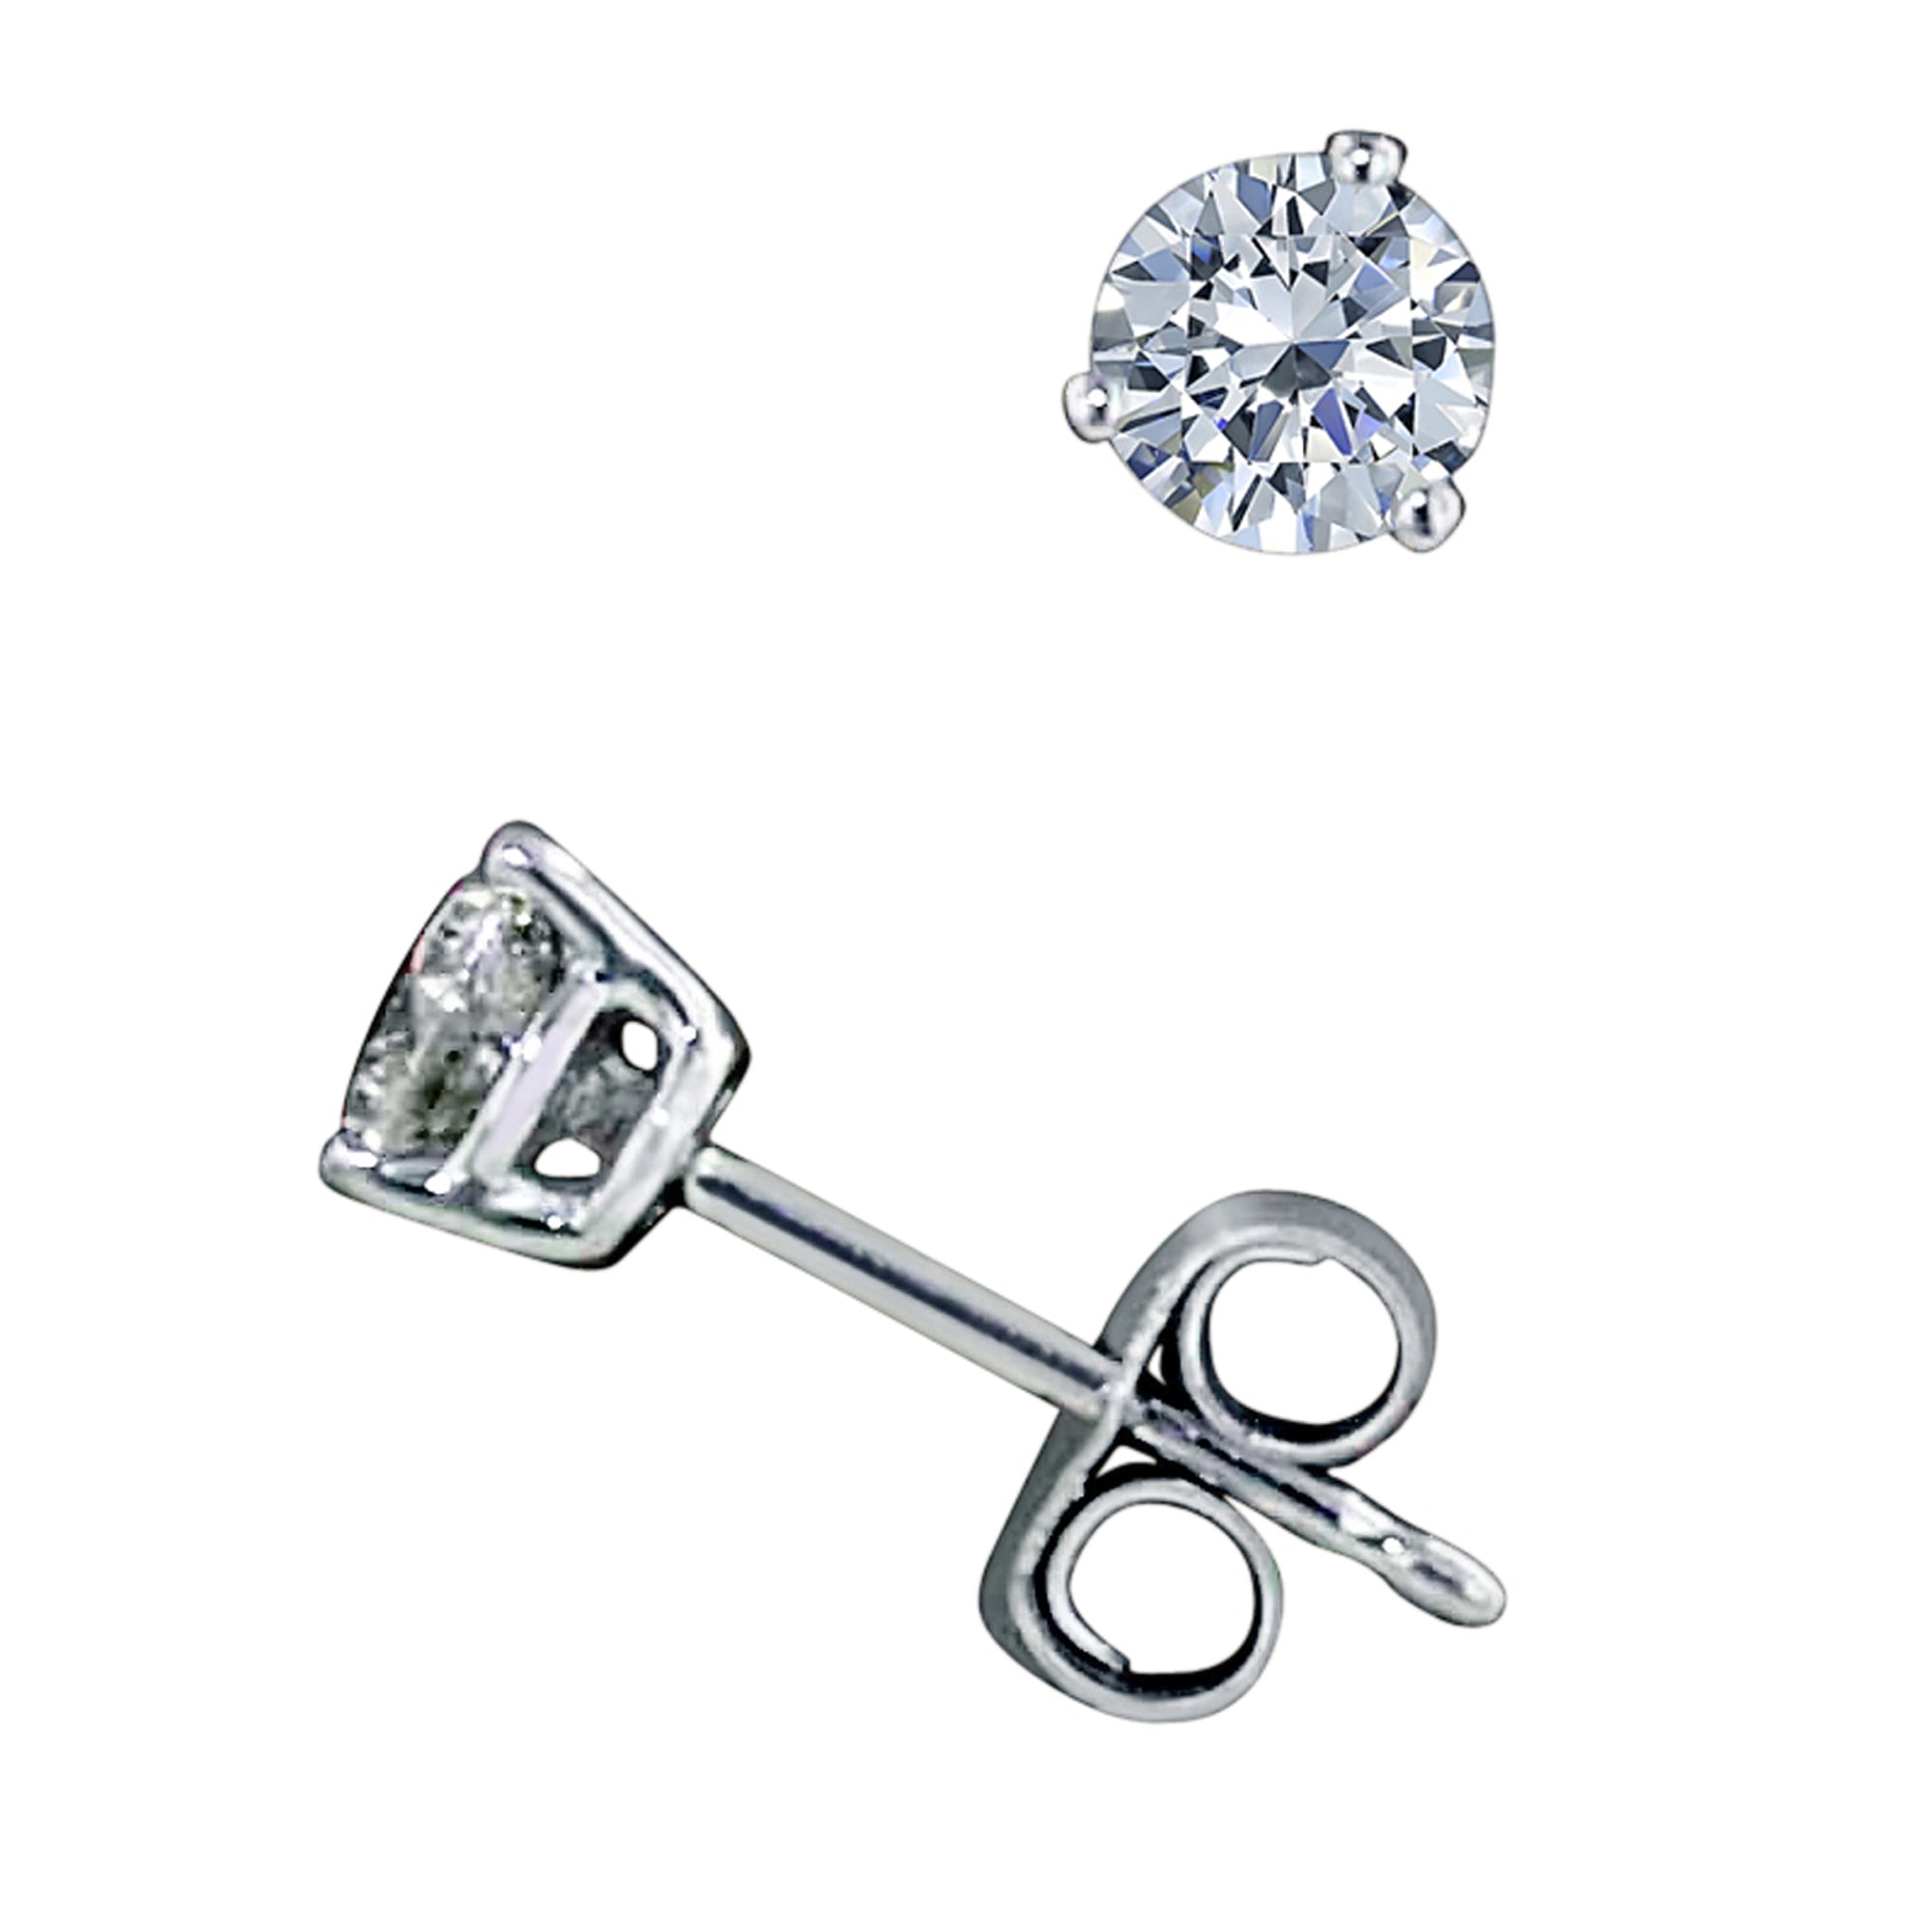 Northern Star Diamond Stud Earrings in 14kt White Gold (1/2ct tw)